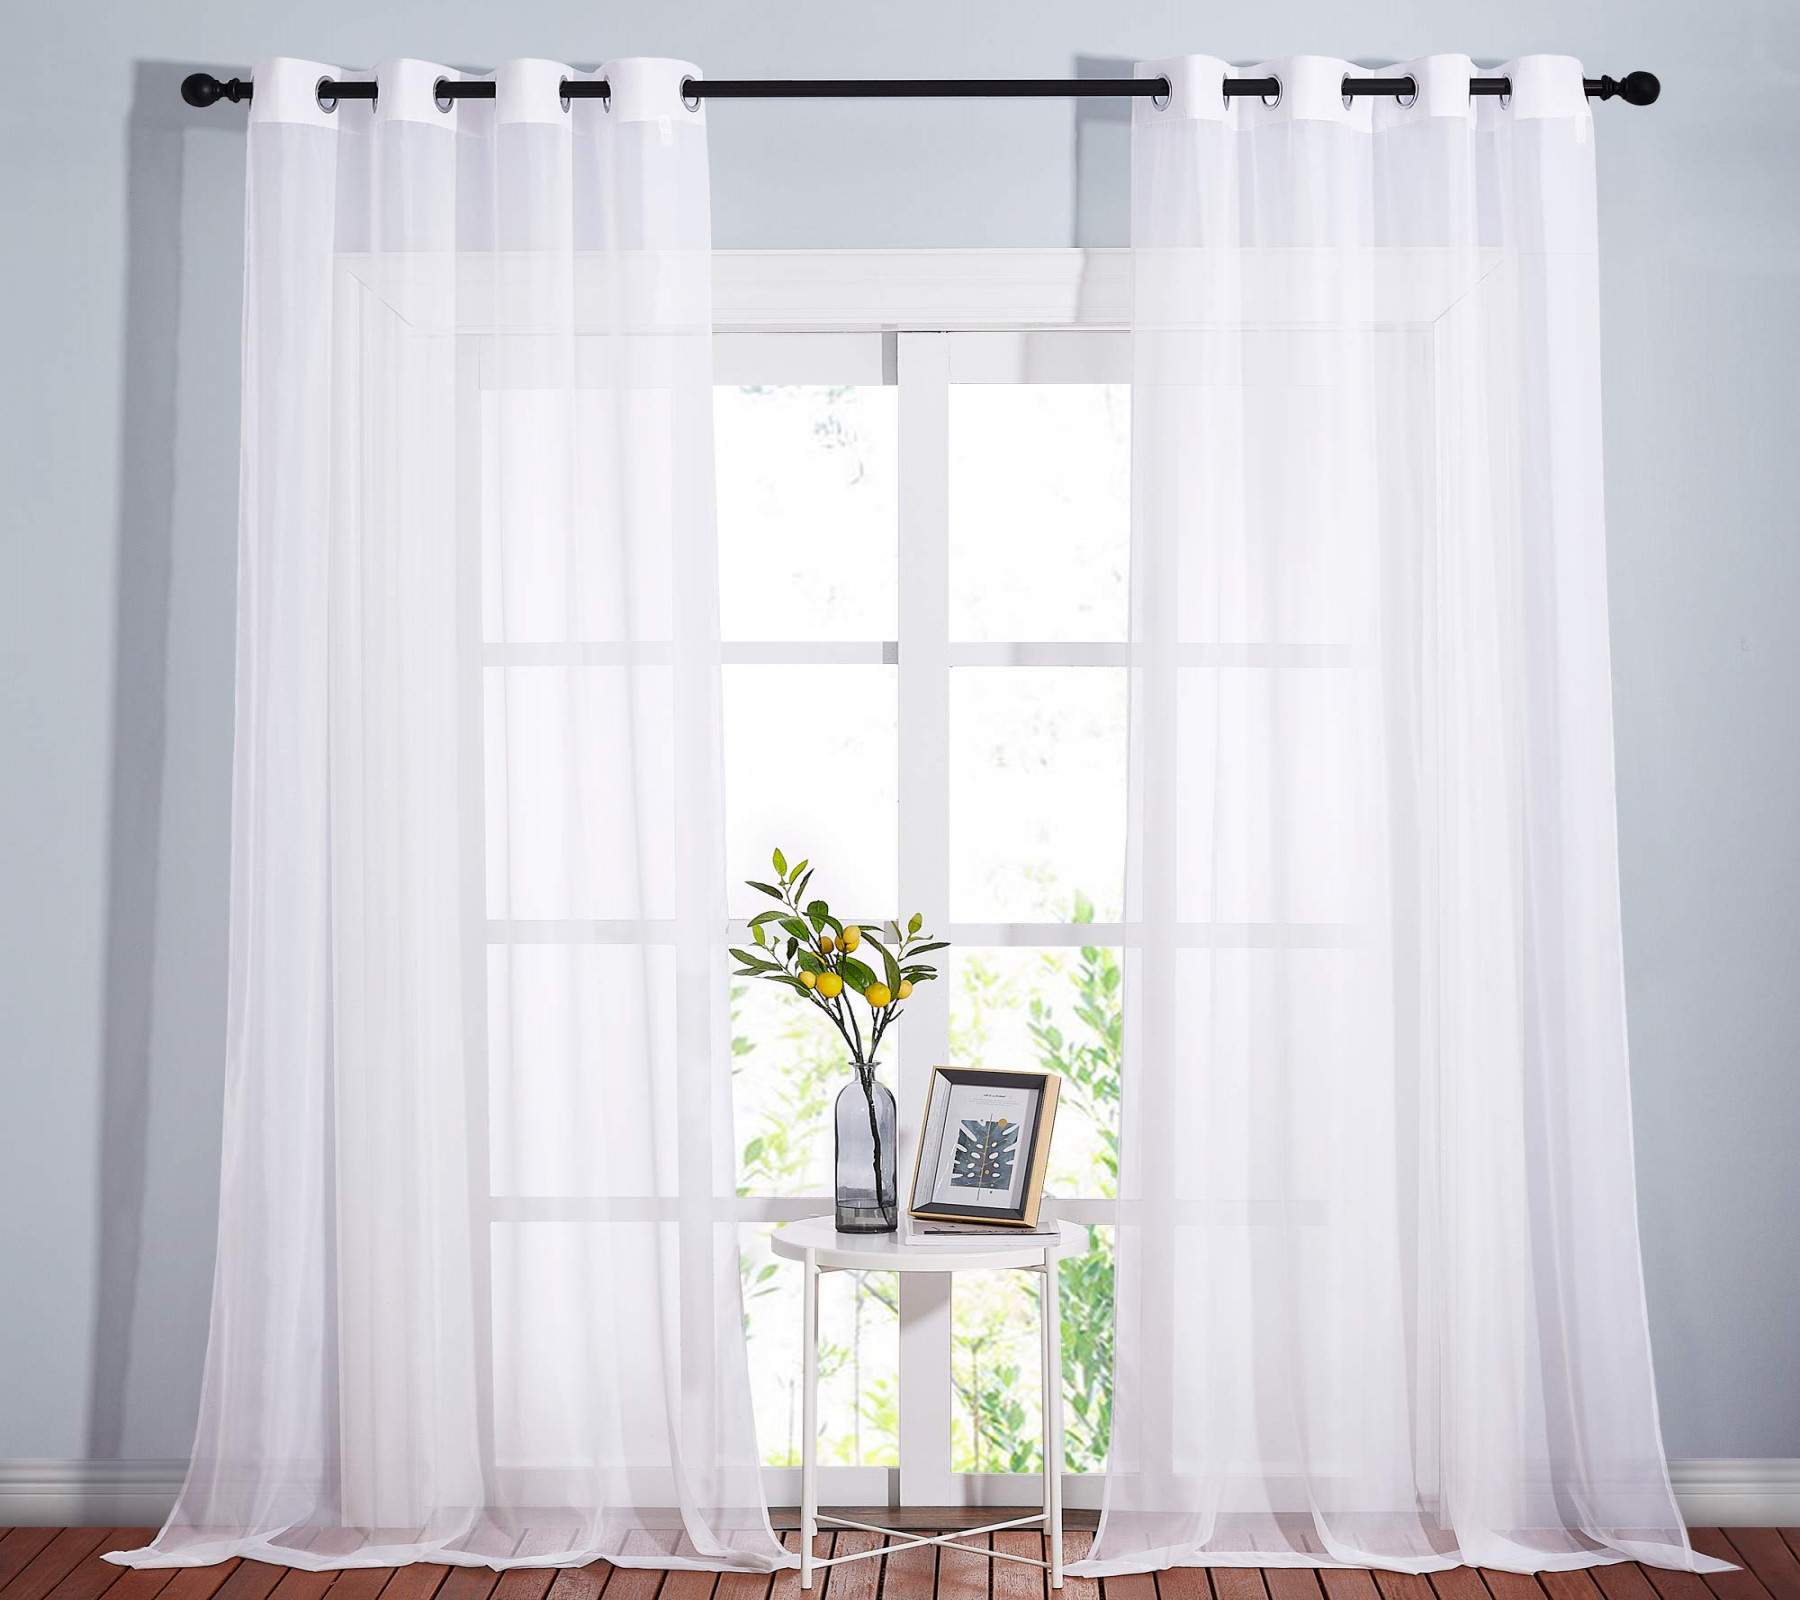 NICETOWN Sheer Window Curtain Panels - Solid White Panels/Drapes with  Grommet Top (-Pack,  Wide x  inch Long, White)